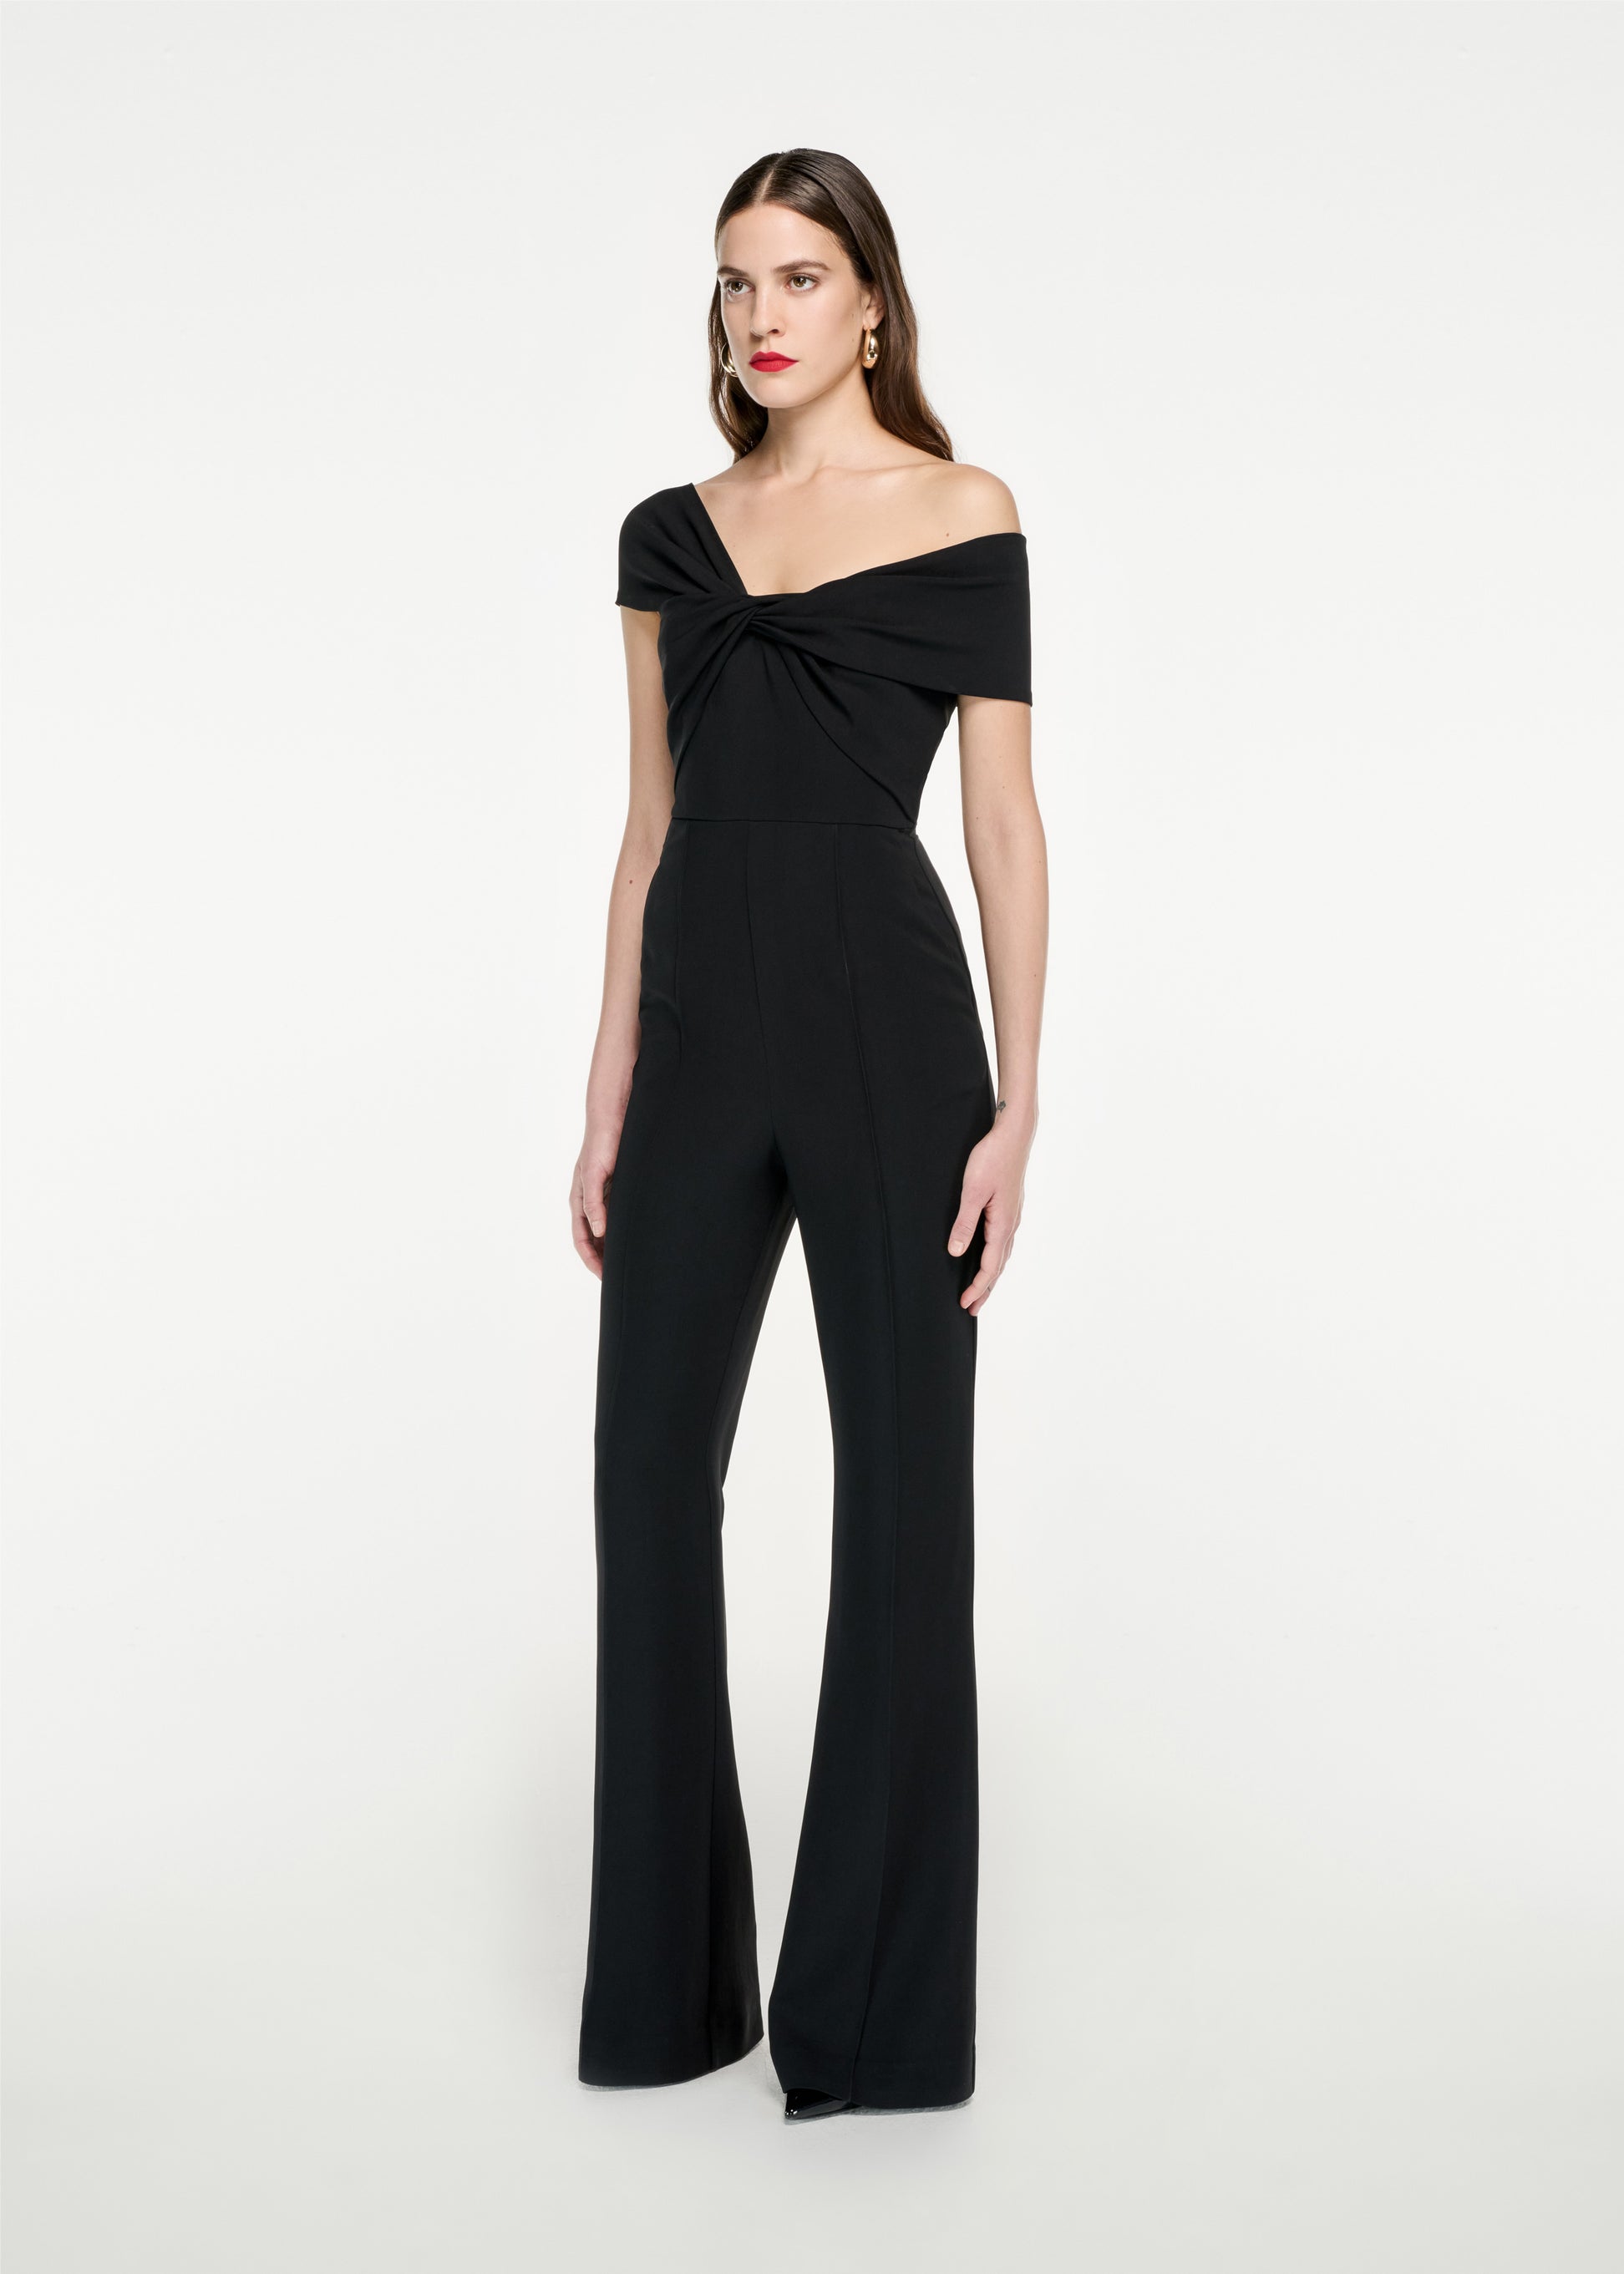 Woman wearing the Asymmetric Stretch Cady Jumpsuit in Black